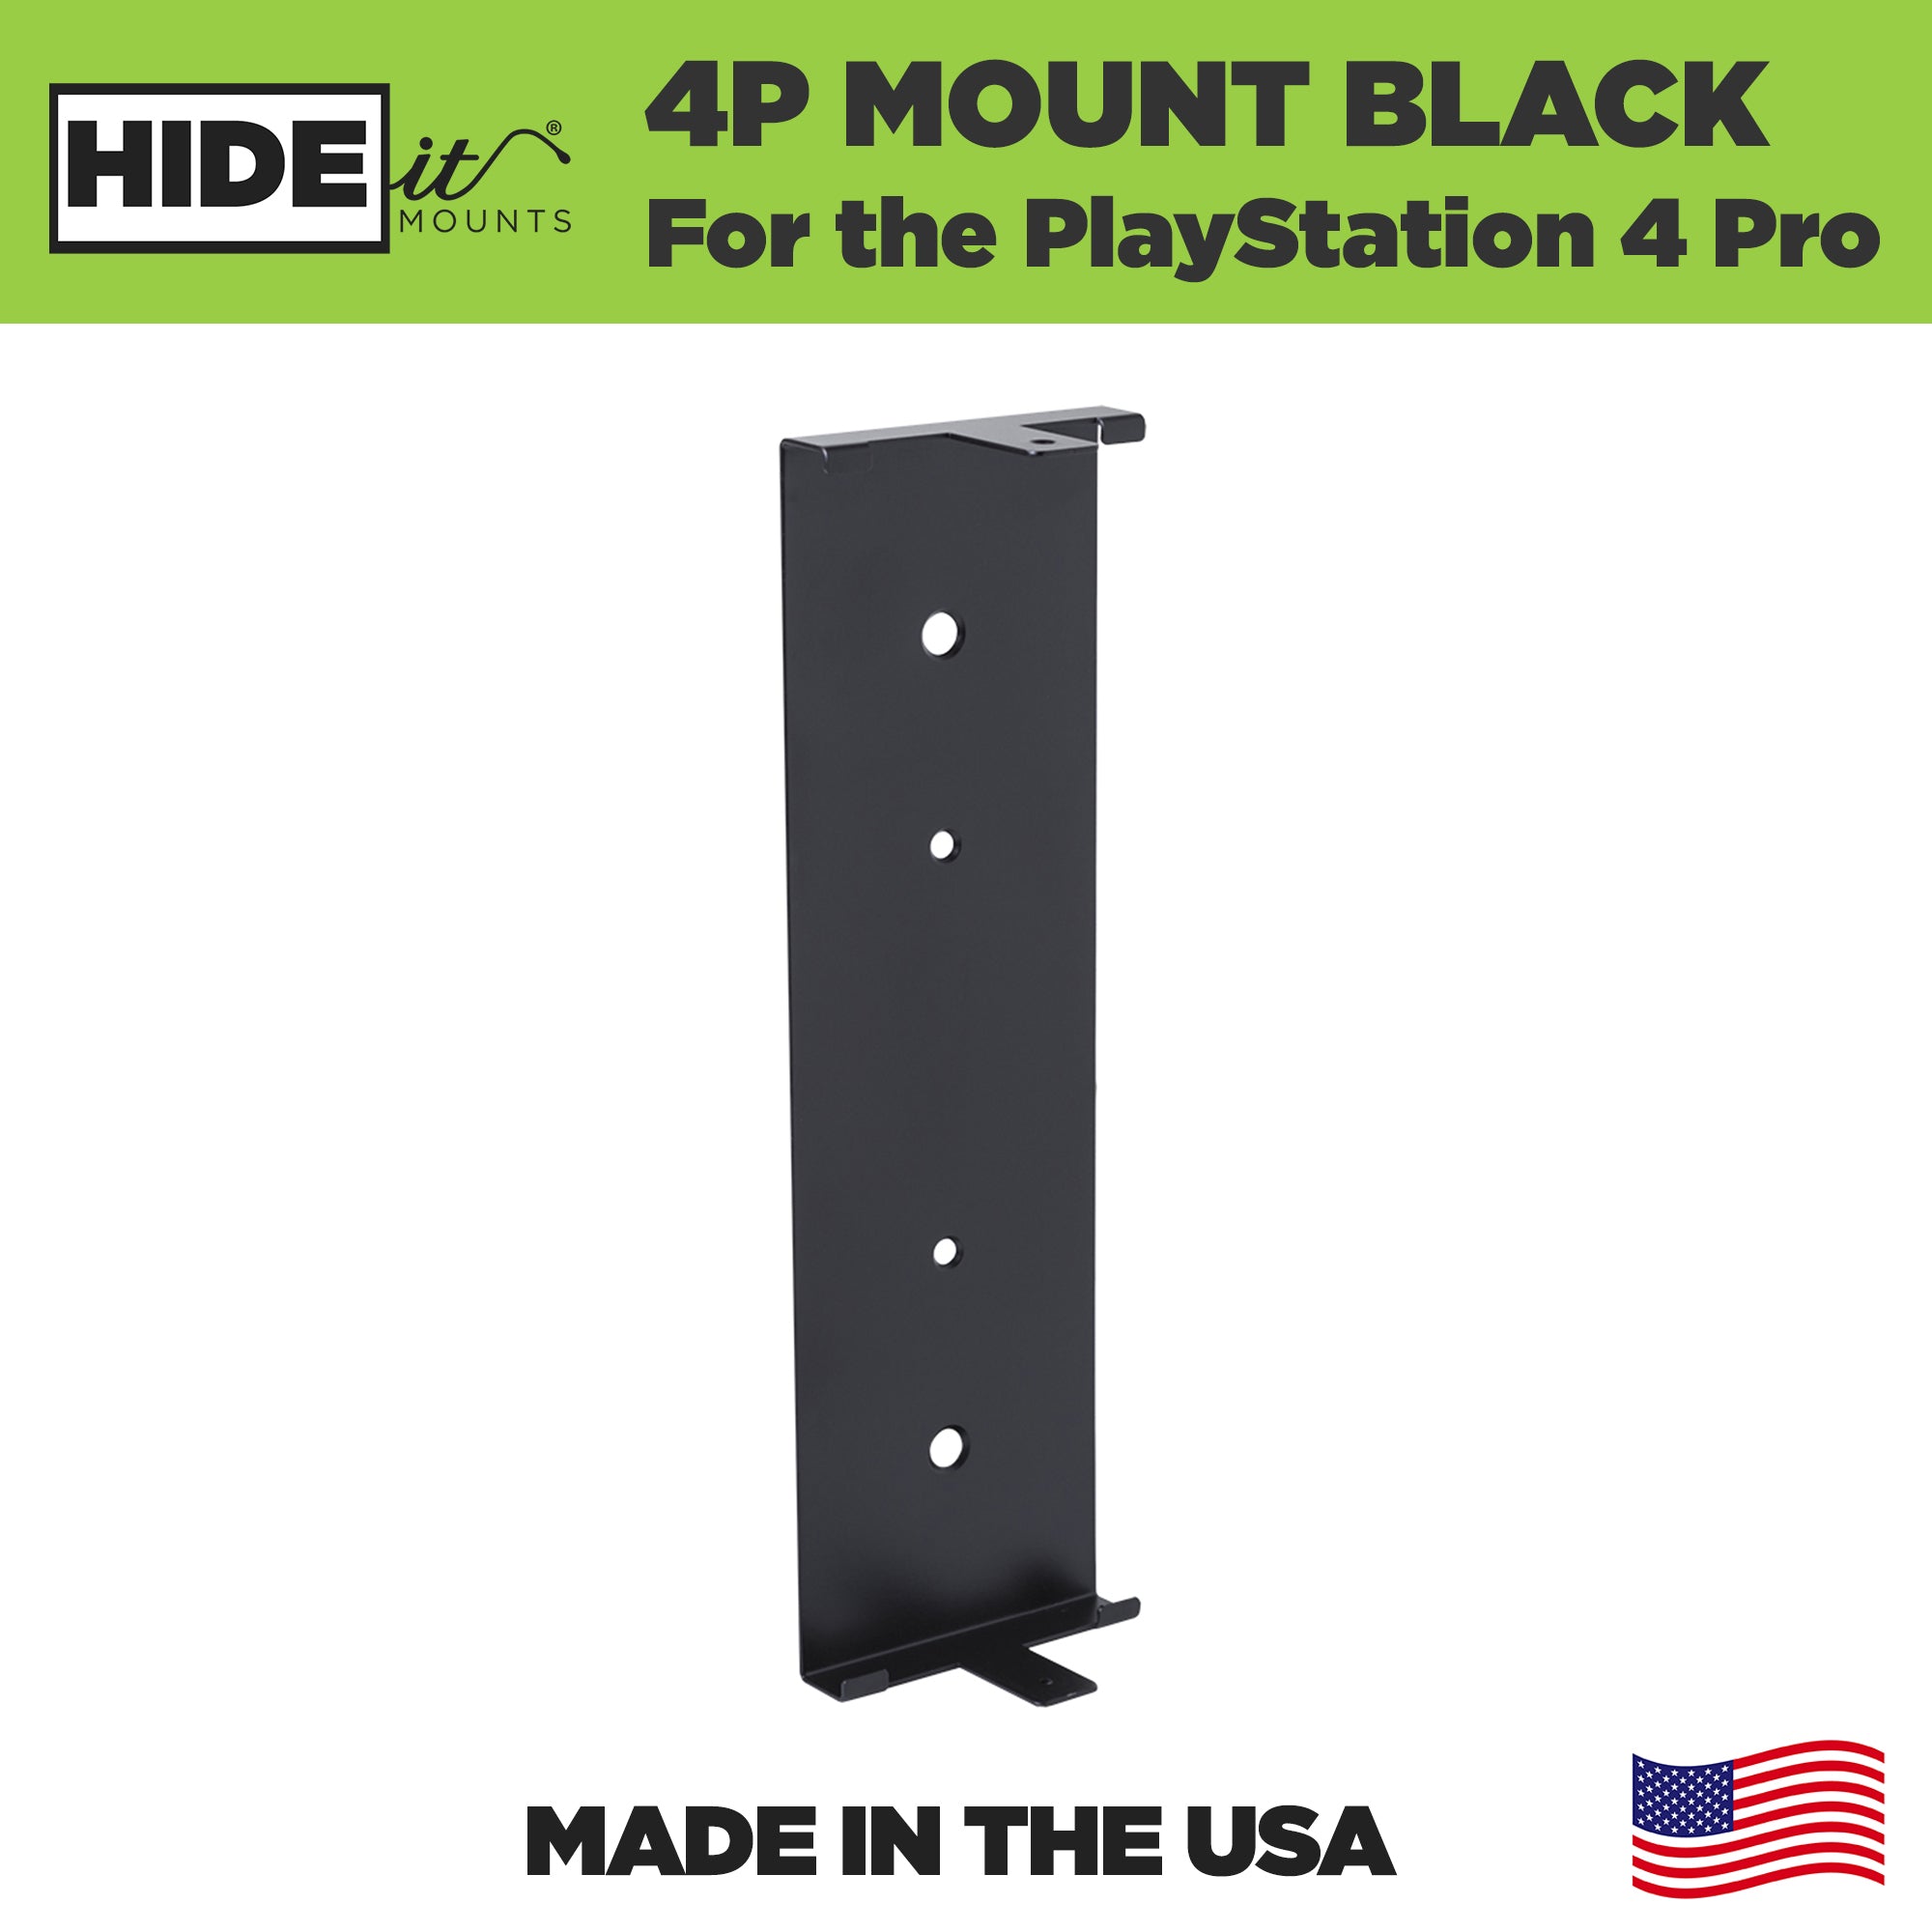 HIDEit Mounts 4P Mount. This Wall Mount for the PlayStation 4 Pro is Made in America by an American Company.